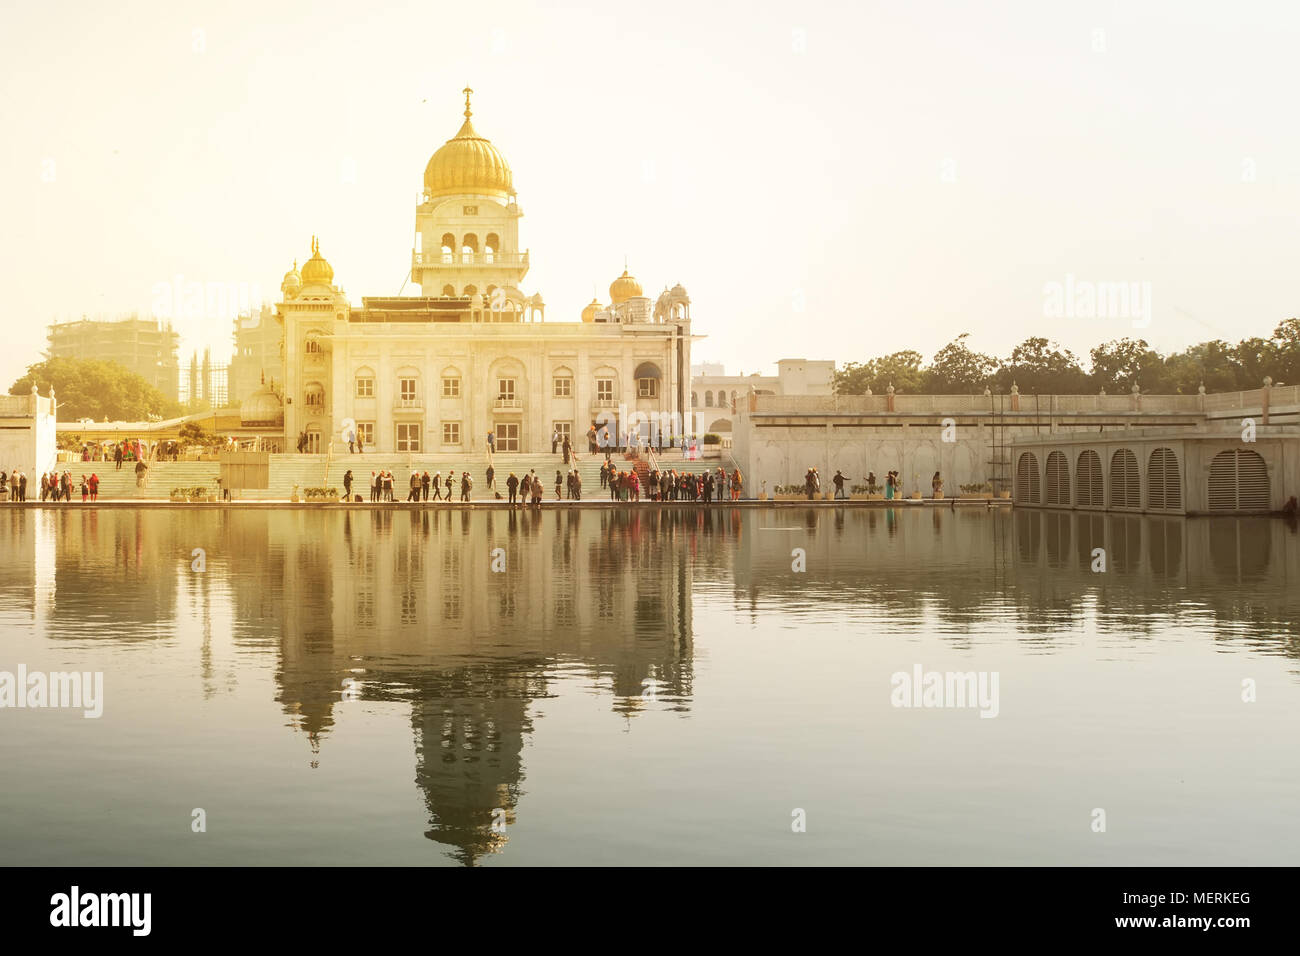 Gurdwara Bangla Sahib is the most prominent Sikh gurdwara. A sacred place of sikhi religion. Golden dome of the temple in the bright yellow sun. A lar Stock Photo